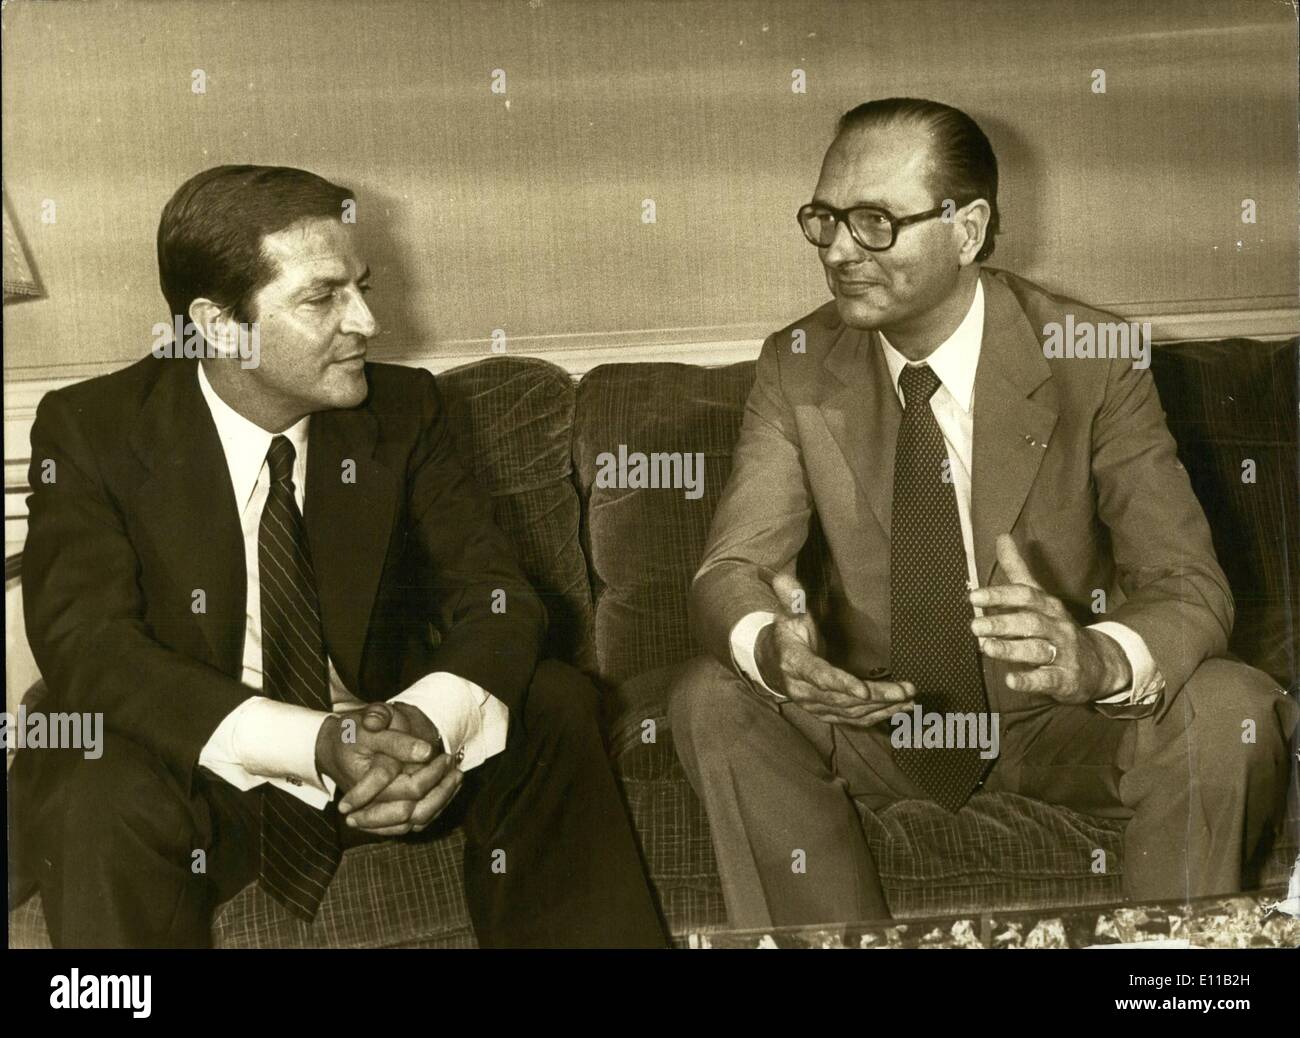 Jul. 07, 1976 - Making a brief trip to Paris, Adolfo Suarez, the new head of the Spanish government, met with Jacques Chirac at Stock Photo